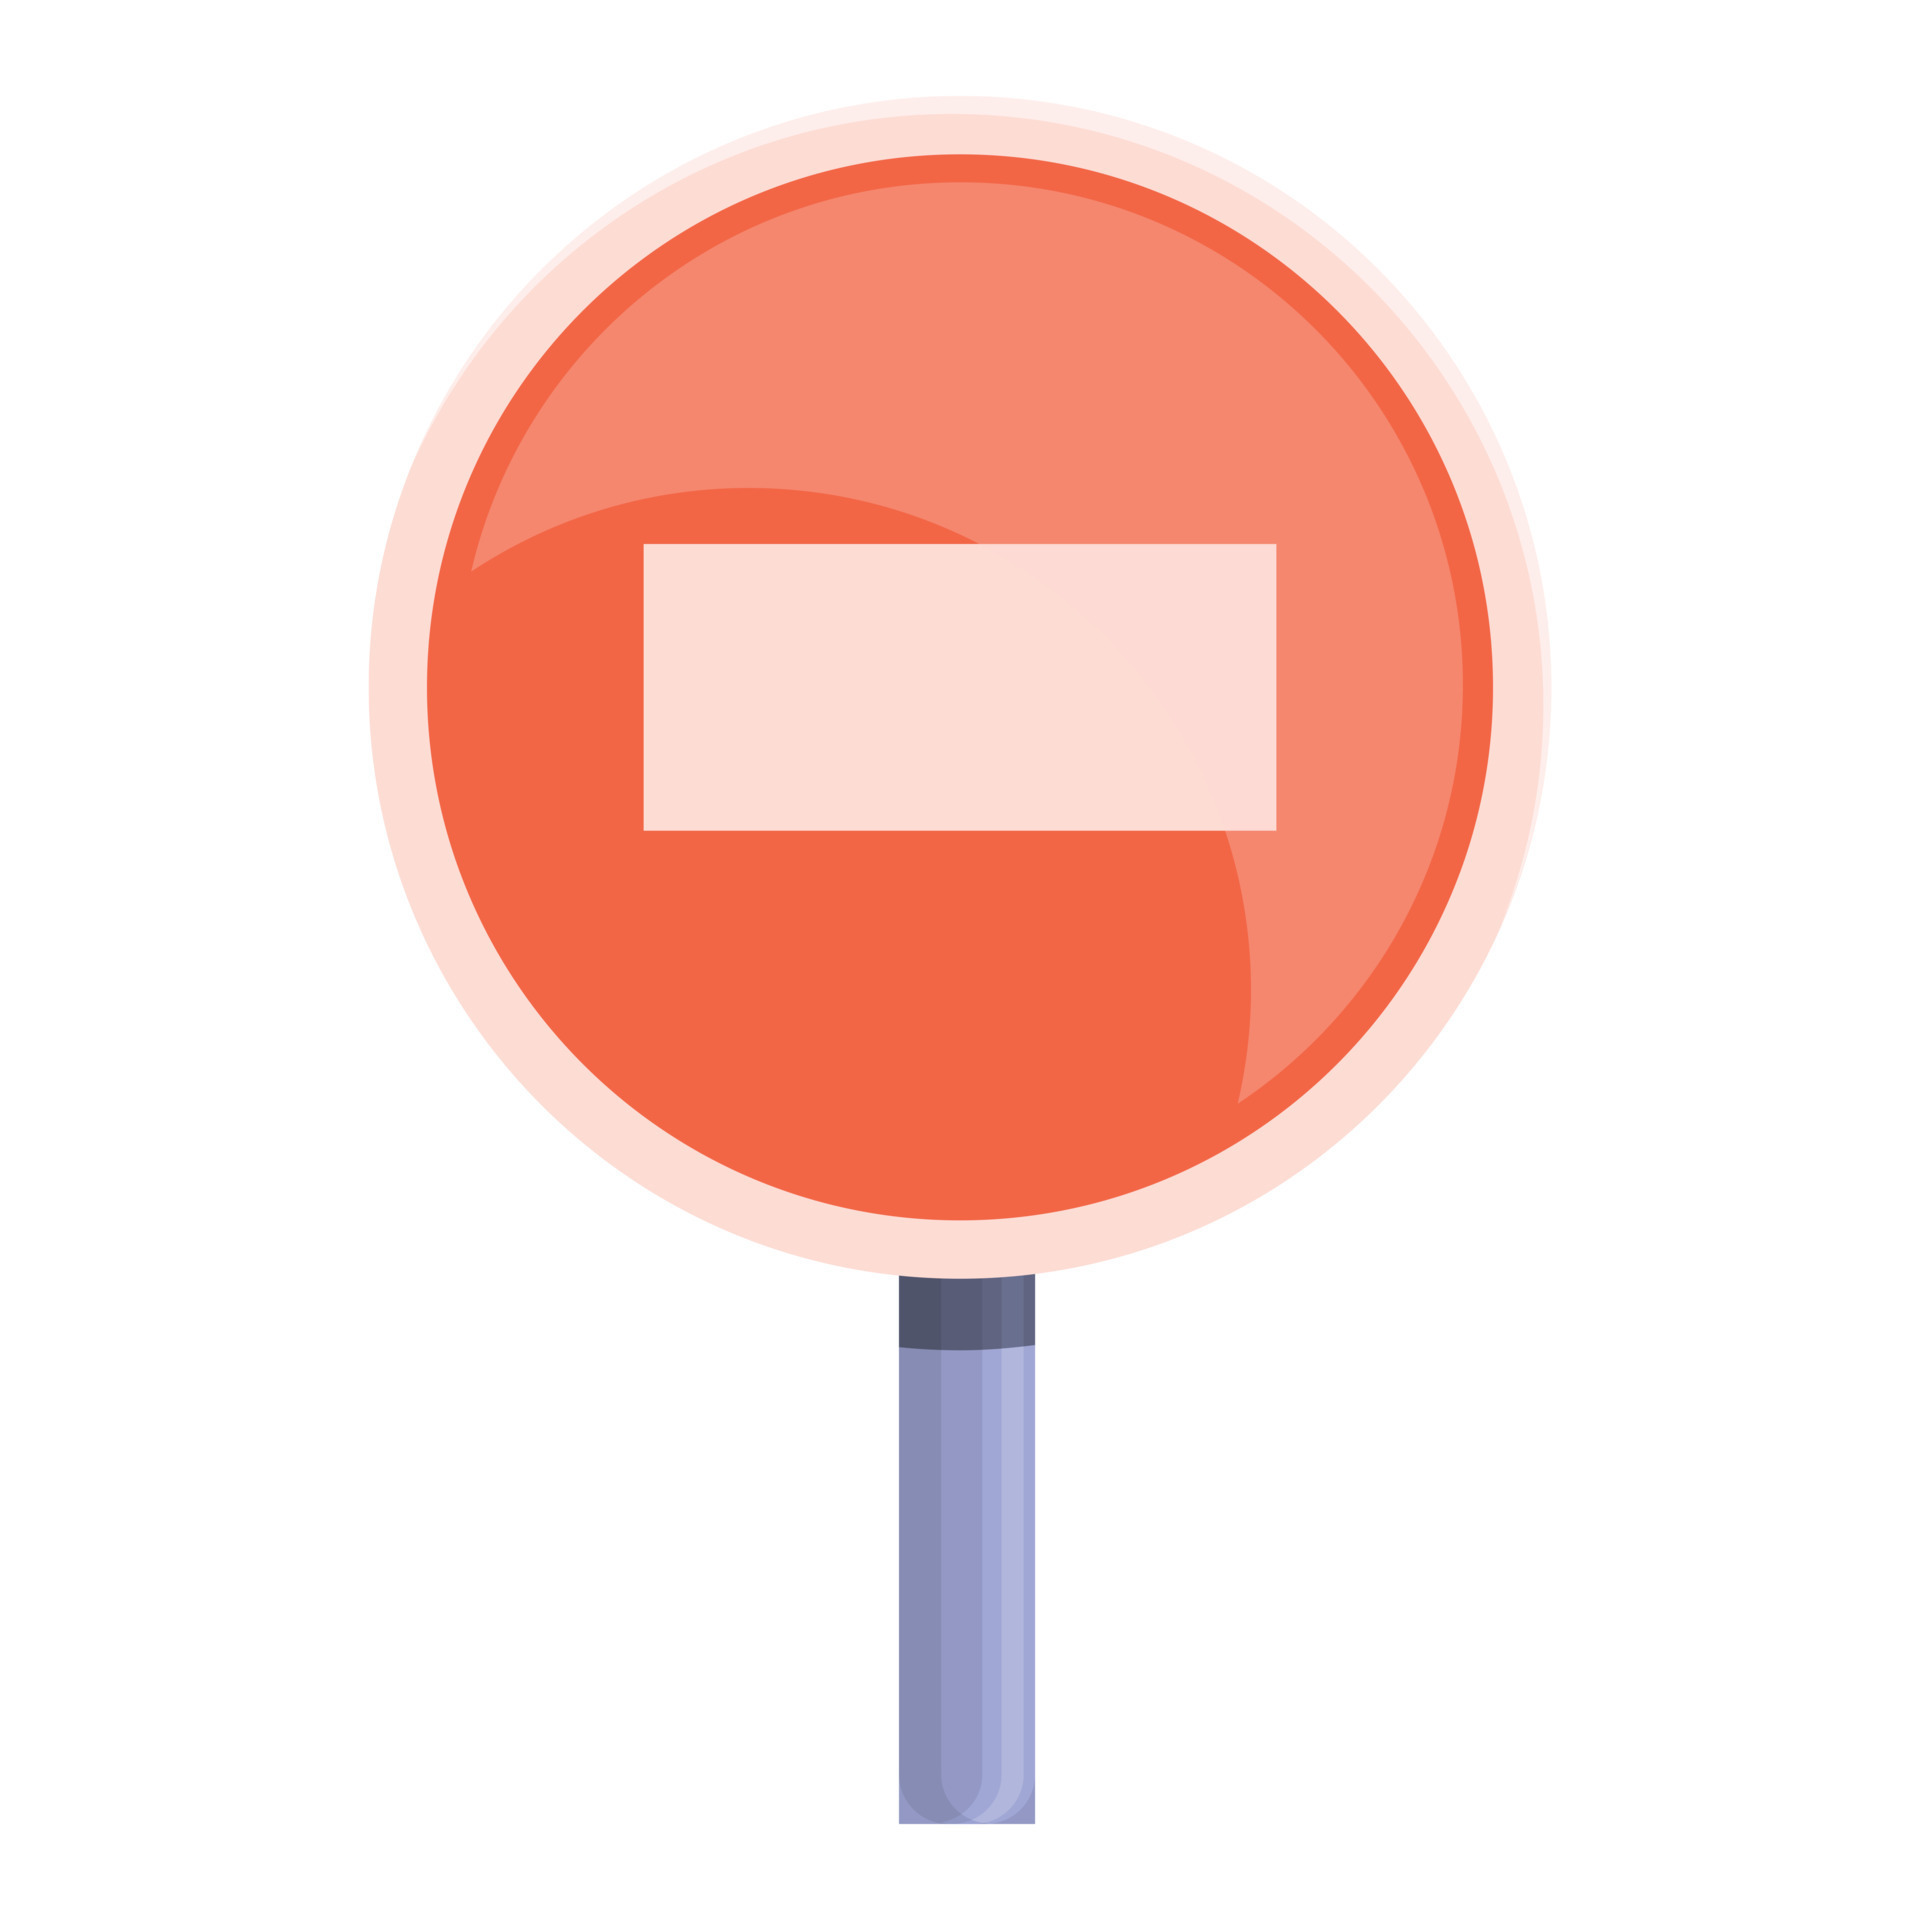 https://static.vecteezy.com/system/resources/previews/014/318/791/original/access-forbidden-road-sign-icon-cartoon-style-vector.jpg